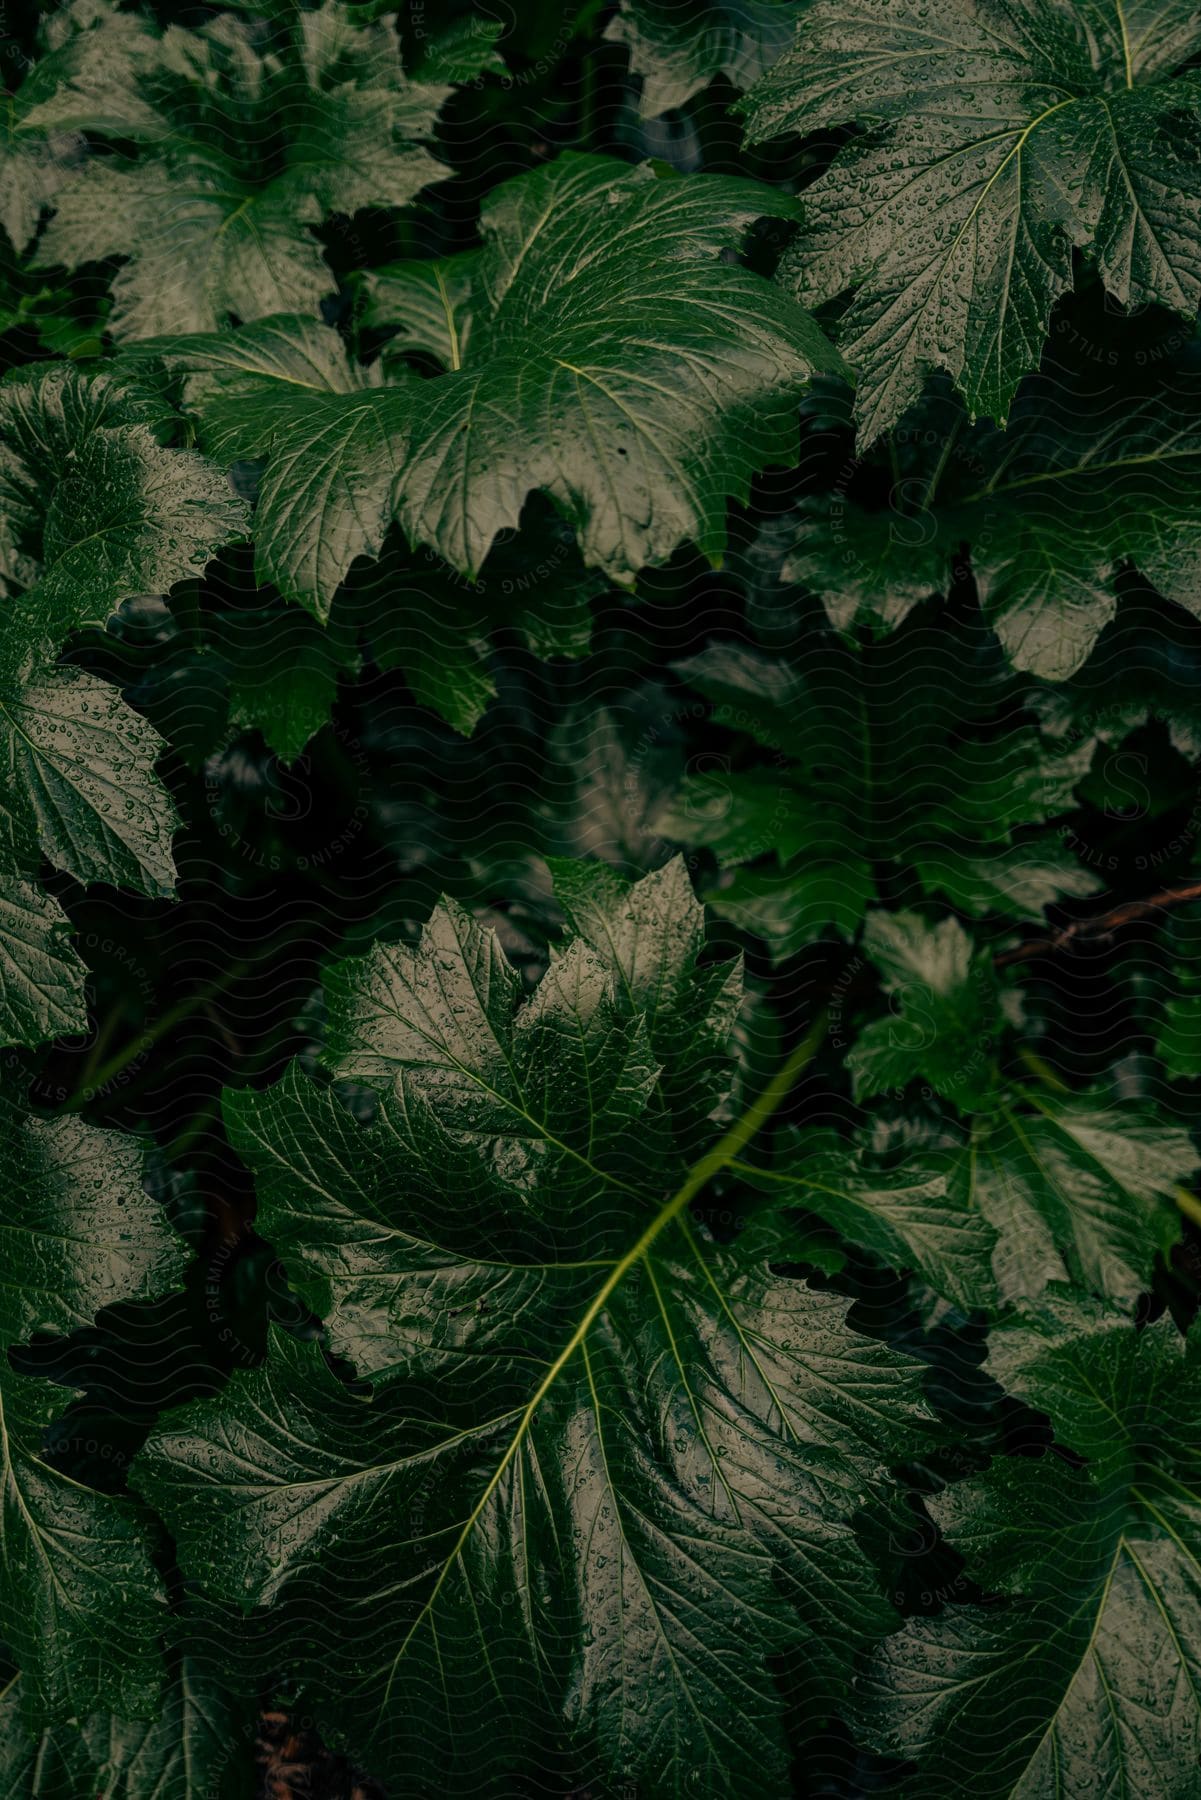 Very large and lush green leaves sprinkled with rain in an outdoor setting